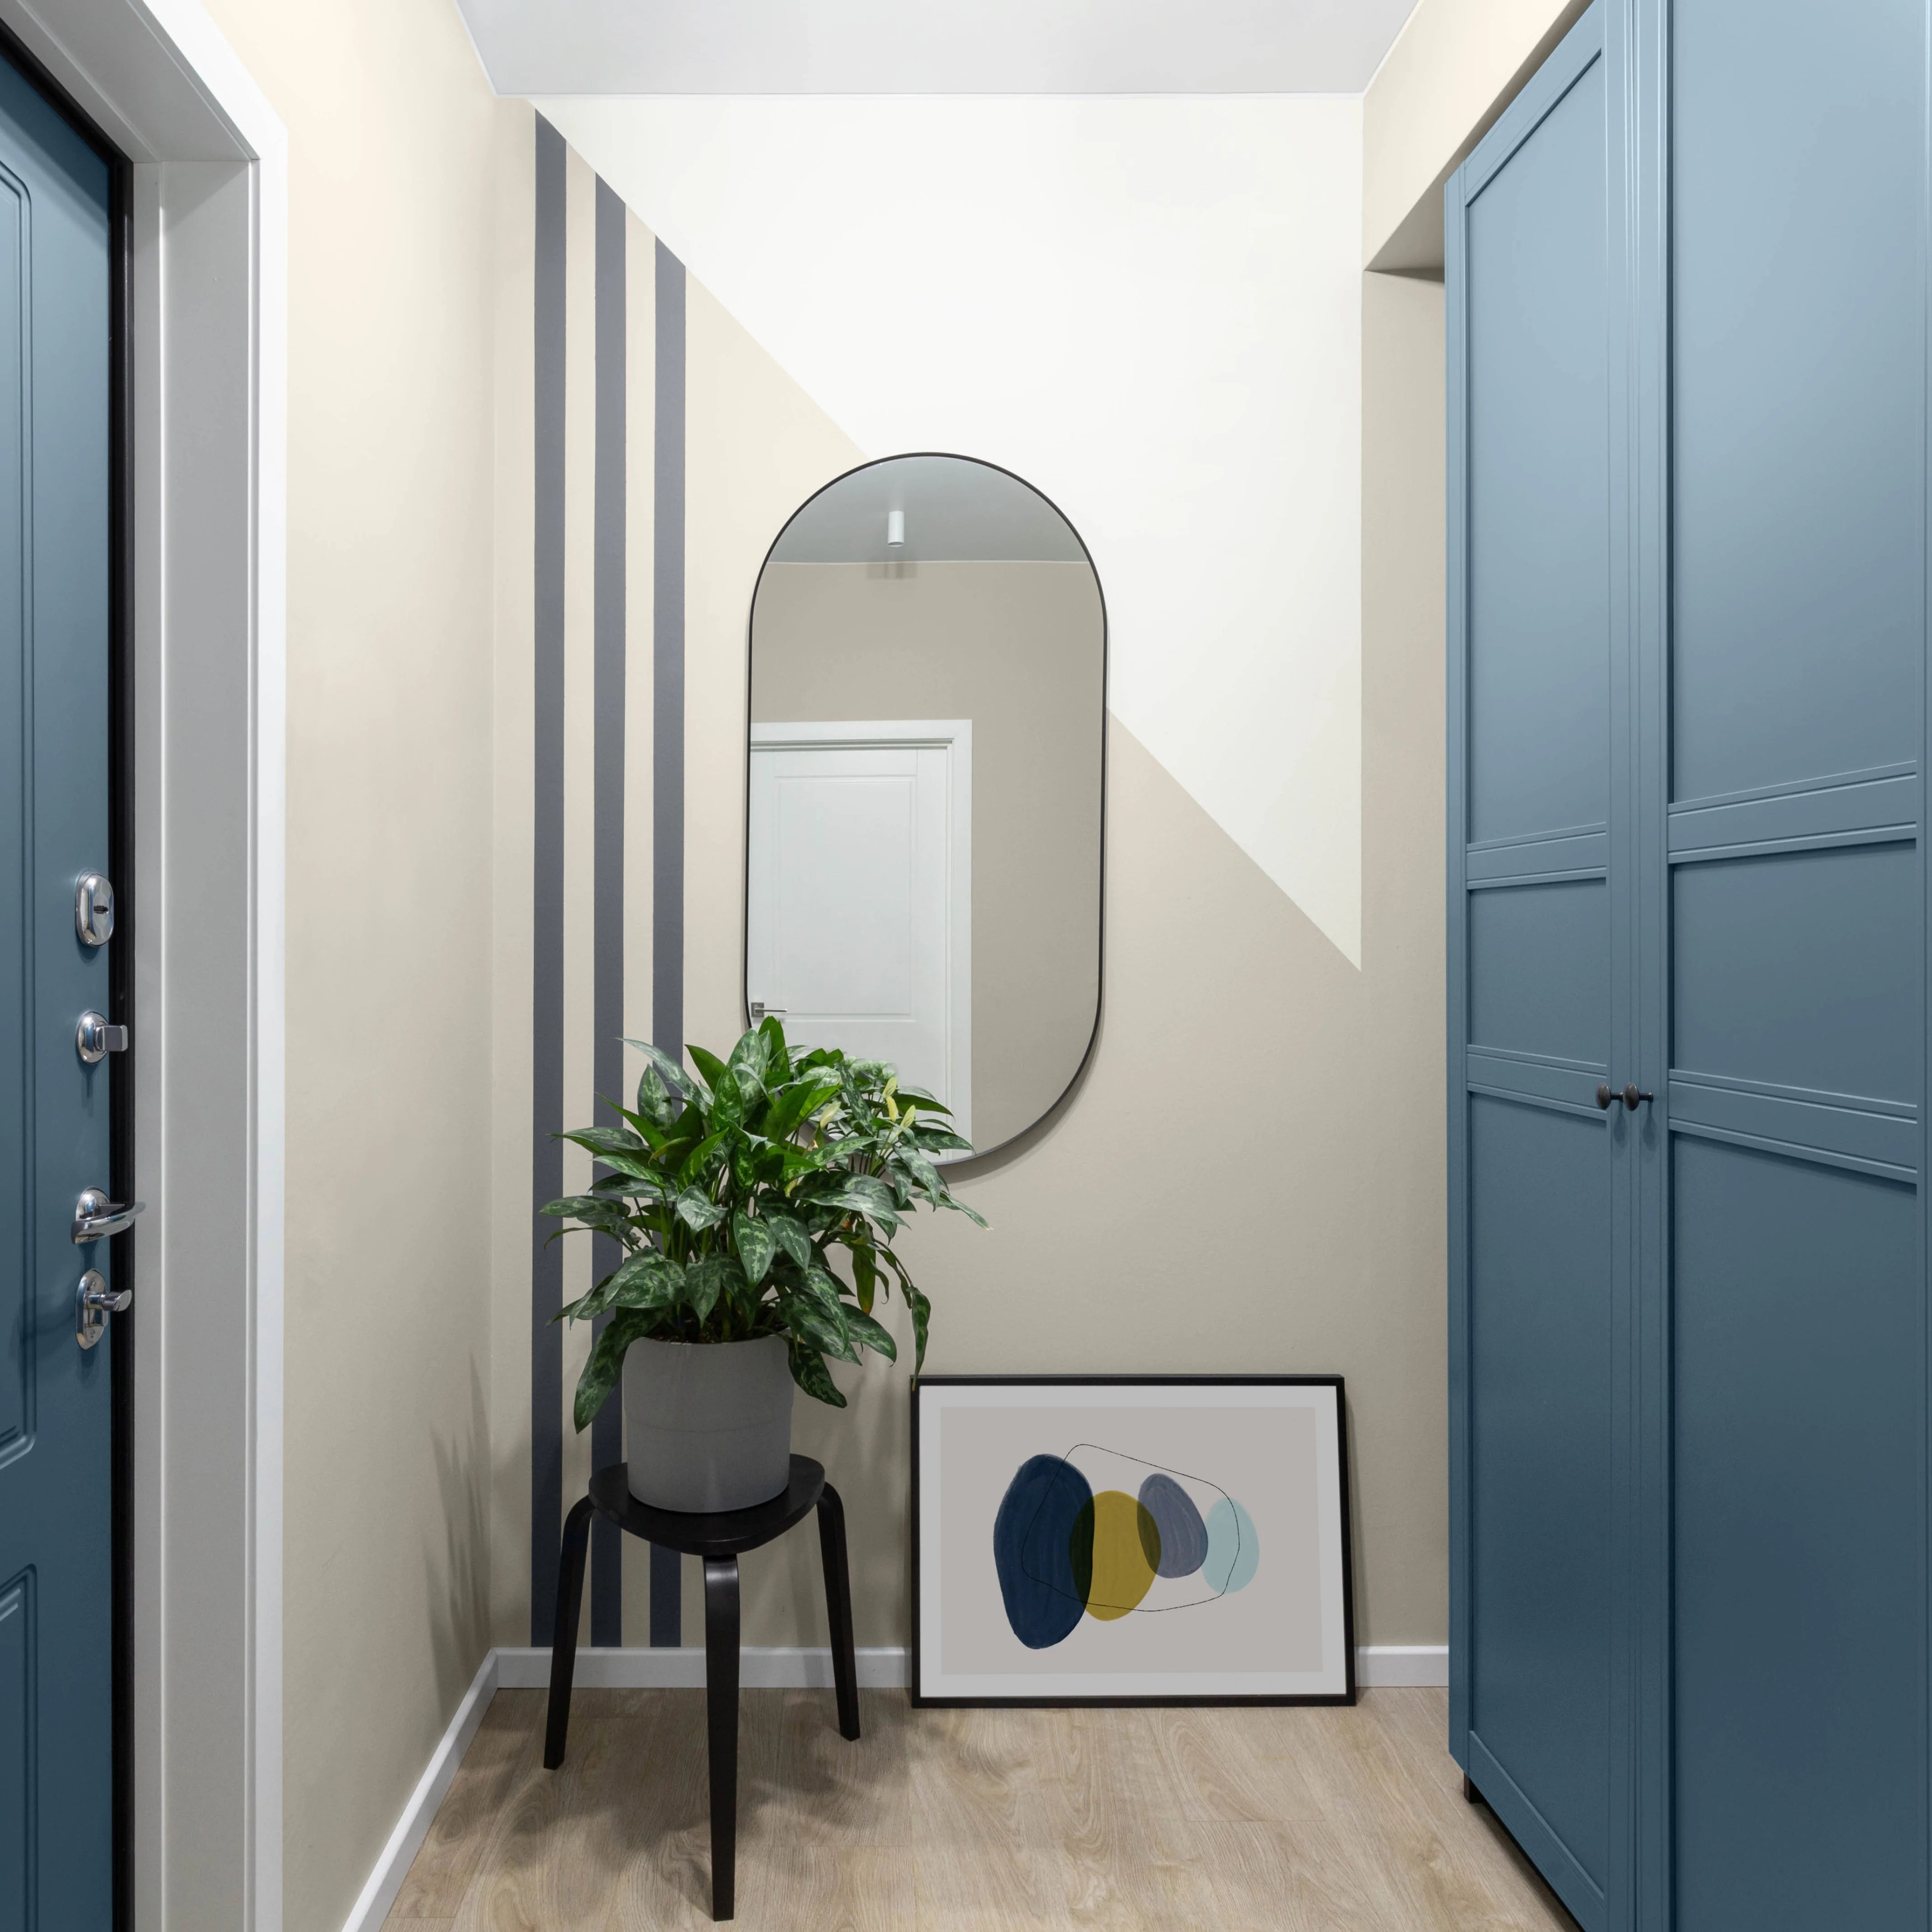 Colourtrend Juniper Whorl | Same Day Dublin and Nationwide Paint in Ireland Delivery by Weirs of Baggot Street - Official Colourtrend Stockist